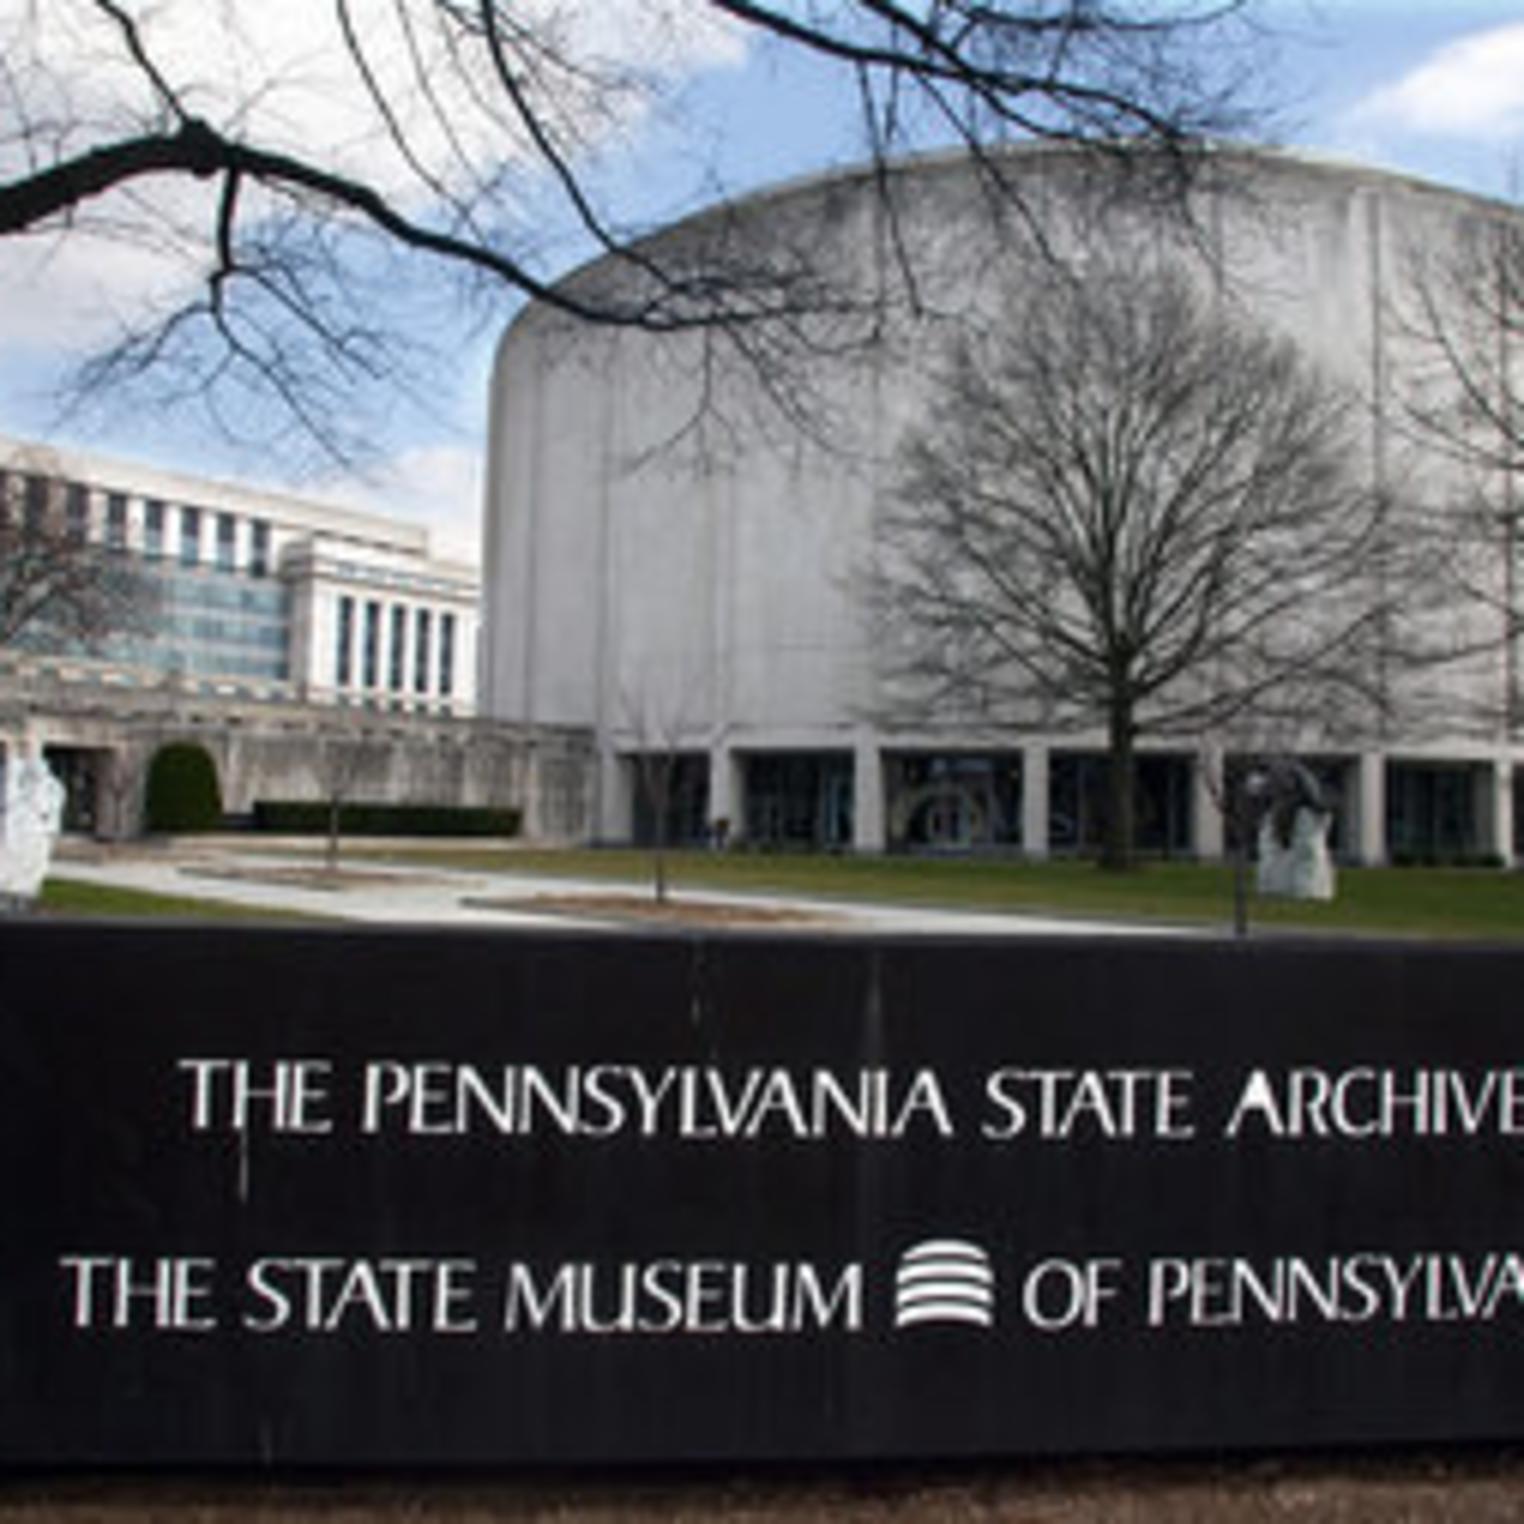 Pennsylvania State Archives